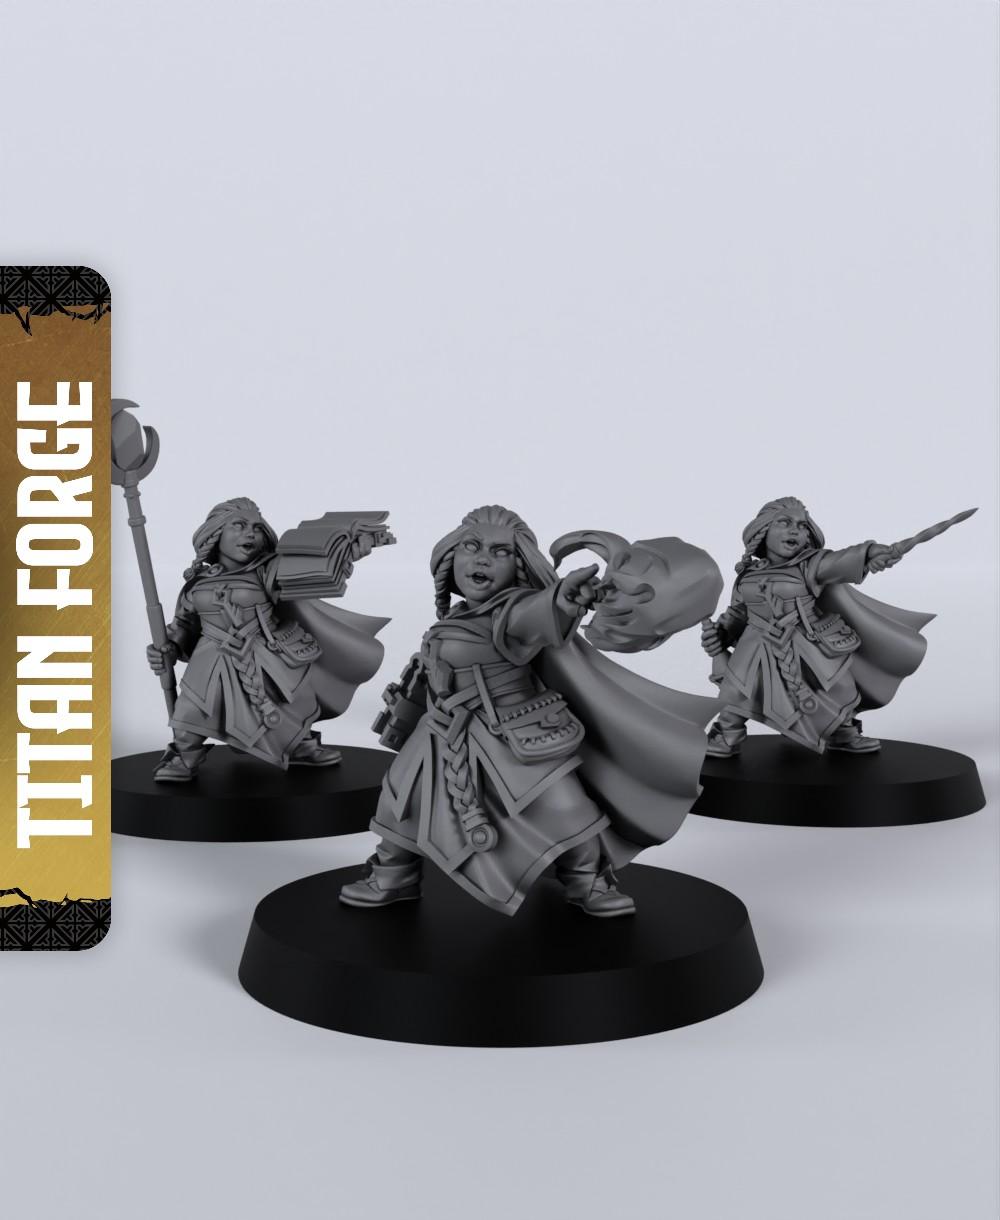 Dwarf Female Wizard - With Free Dragon Warhammer - 5e DnD Inspired for RPG and Wargamers 3d model